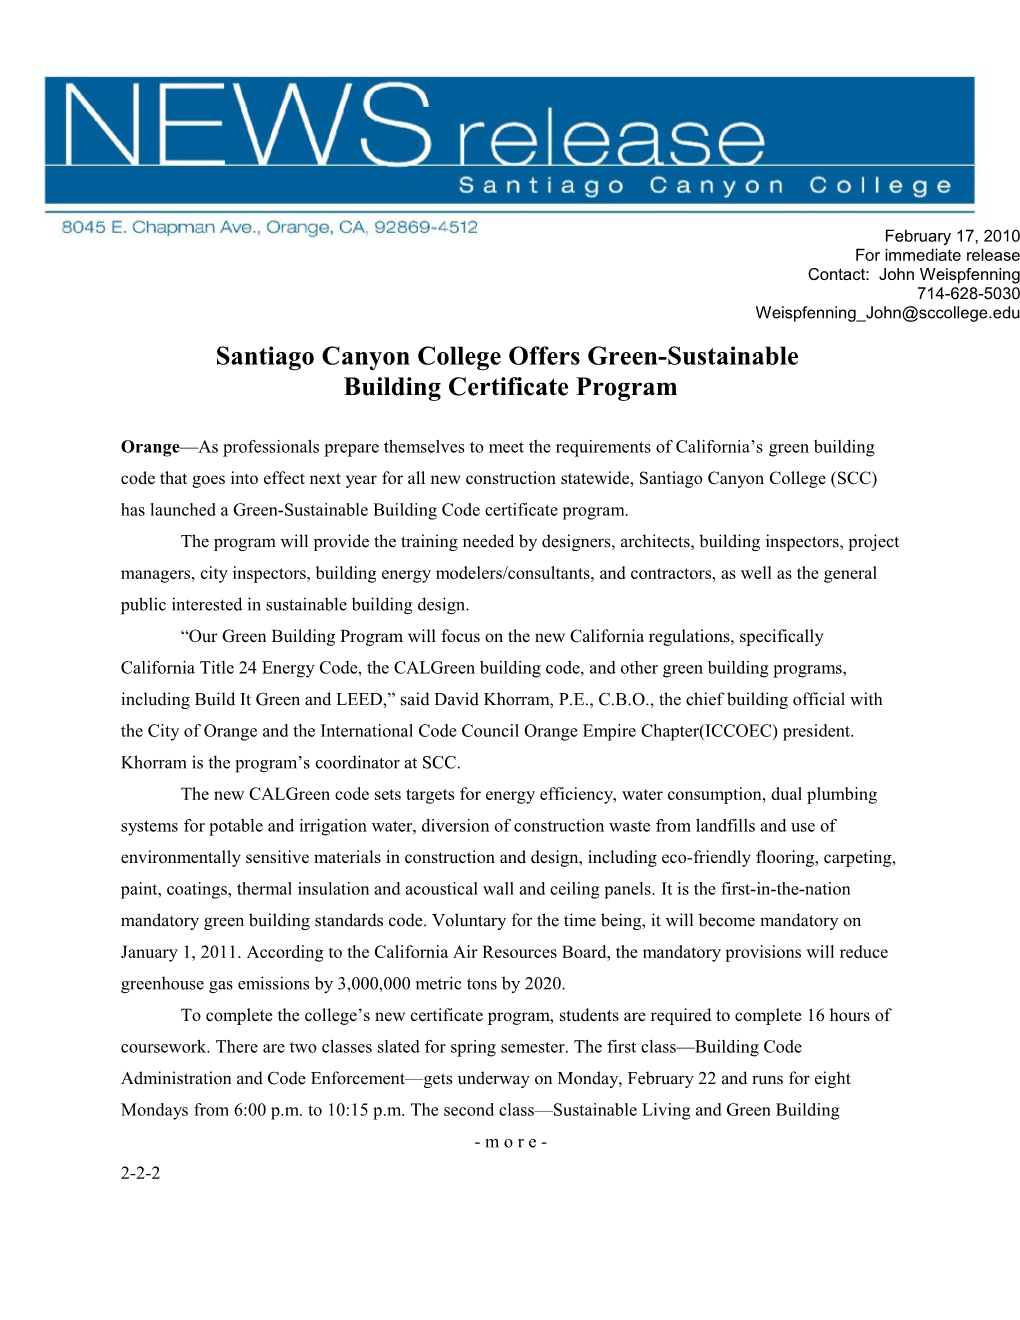 Santiago Canyon College Offers Green-Sustainable Building Certificate Program